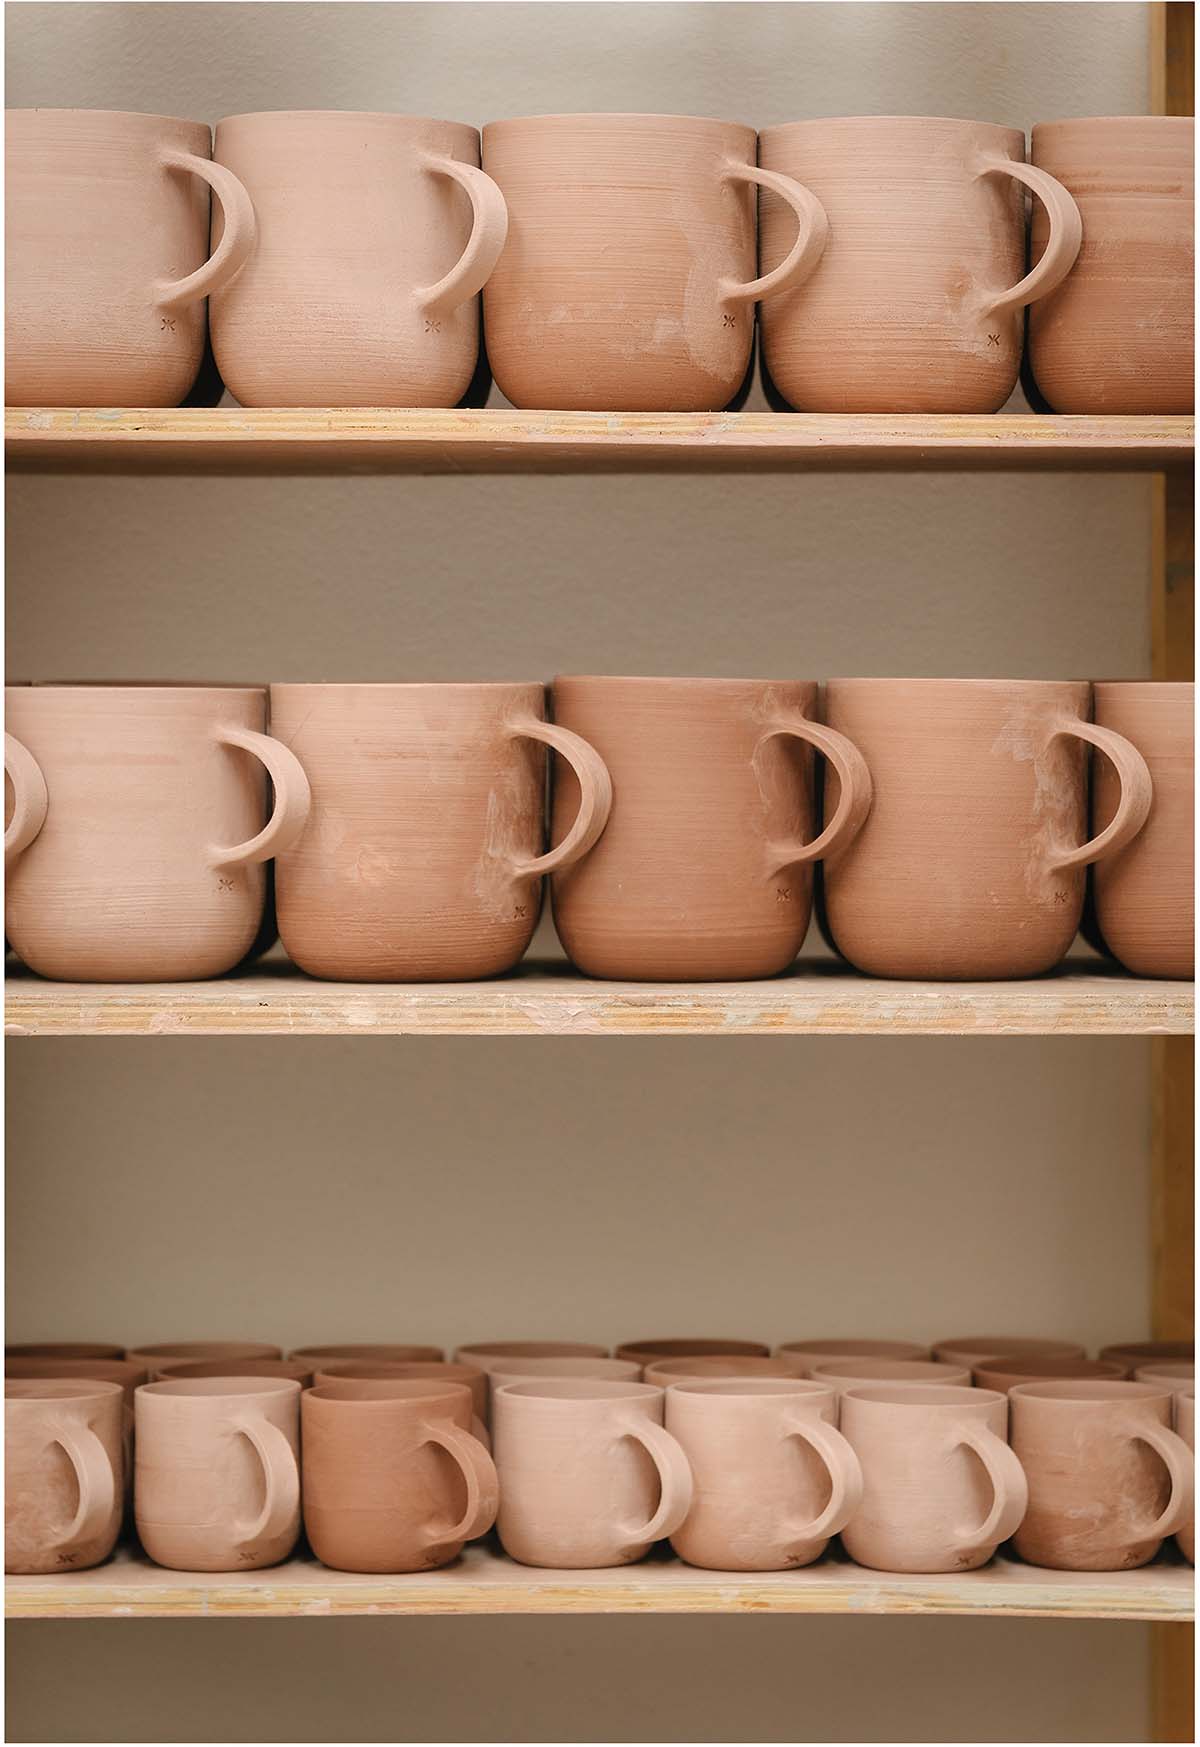 Cara Guthrie's shelf of ceramic mugs, formed and ready to design for her collaboration with IMAGE | Murray Orr. Ceramic mugs in Cara's studio, ready to be designed in collaboration with KESTIN®